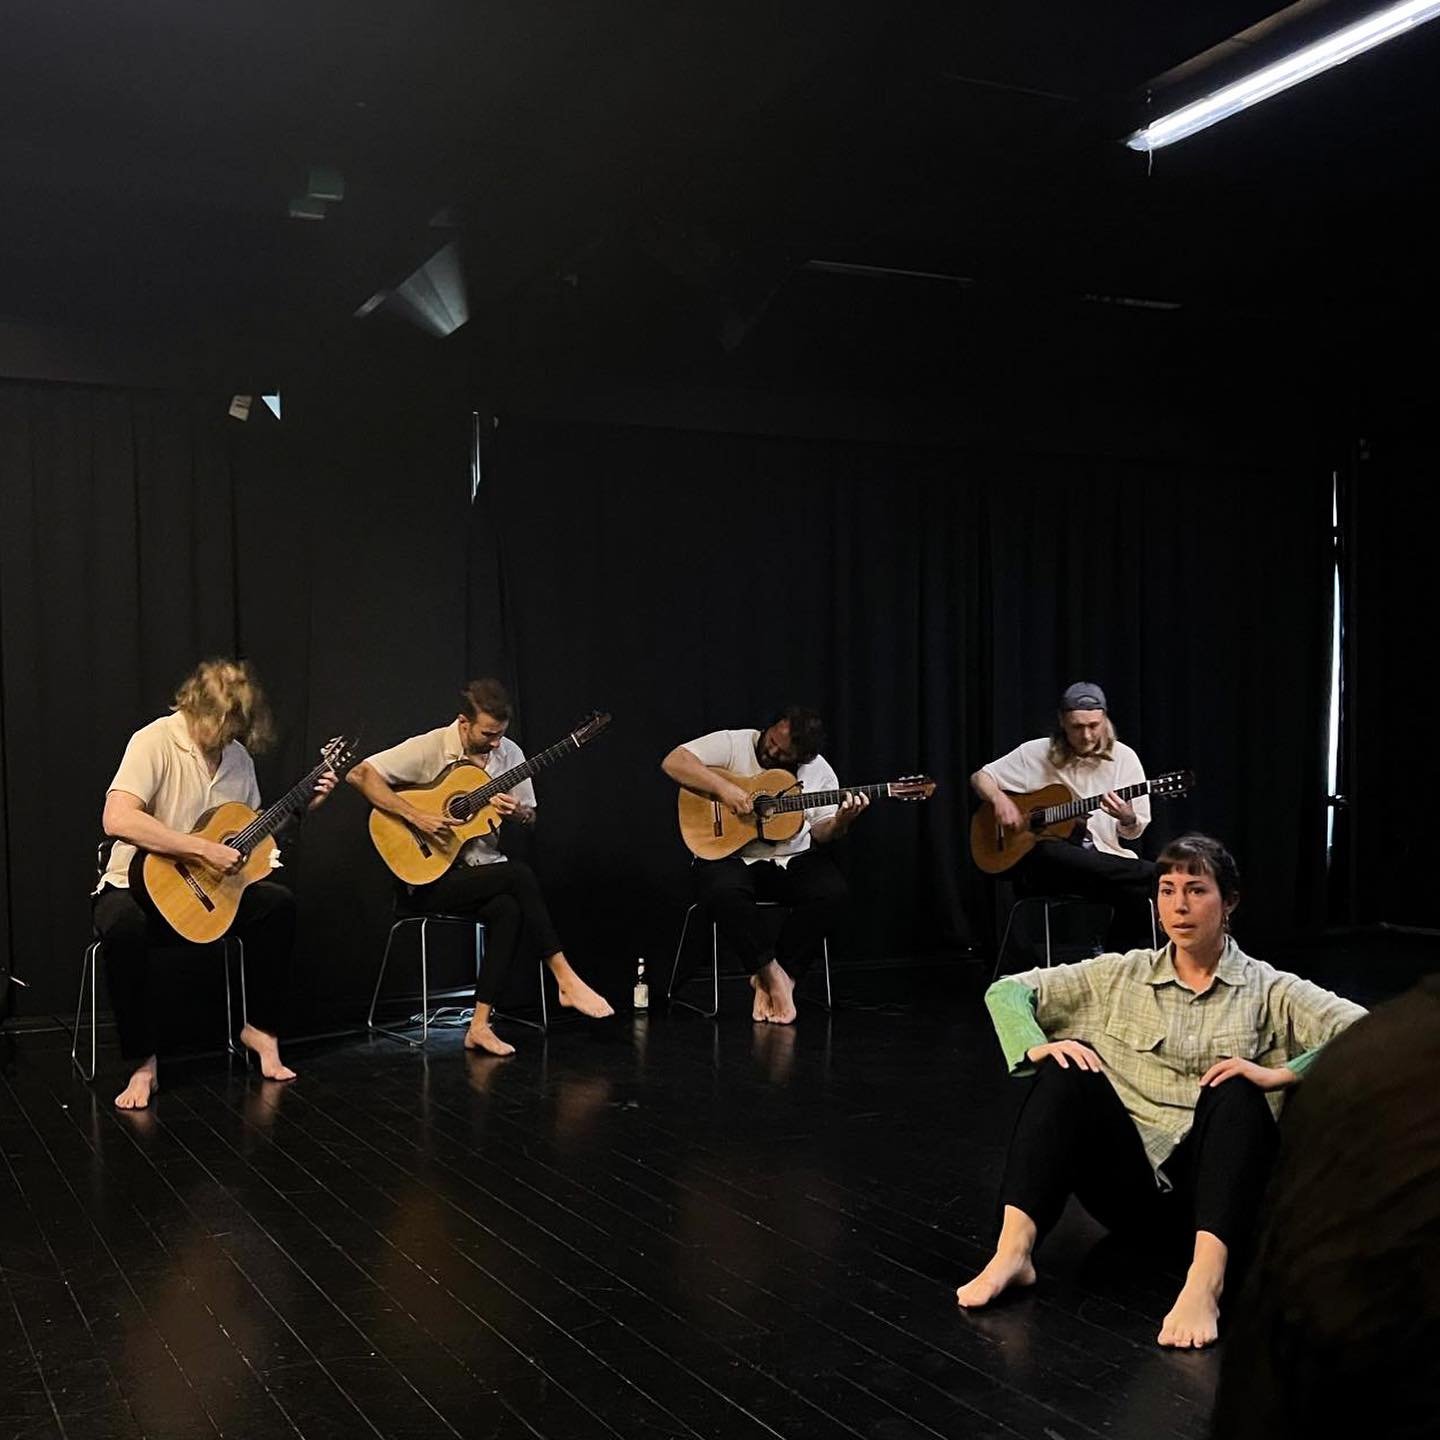 Some documentation from the premiere of our new guitar/dance-show &rdquo;Beach Findings&rdquo; at @interartscenter Malm&ouml; last saturday. Super solid dancing by @lisisfisis &amp; @peppepetra 
Thanks a lot to the Team and everyone who came ❤️

We h